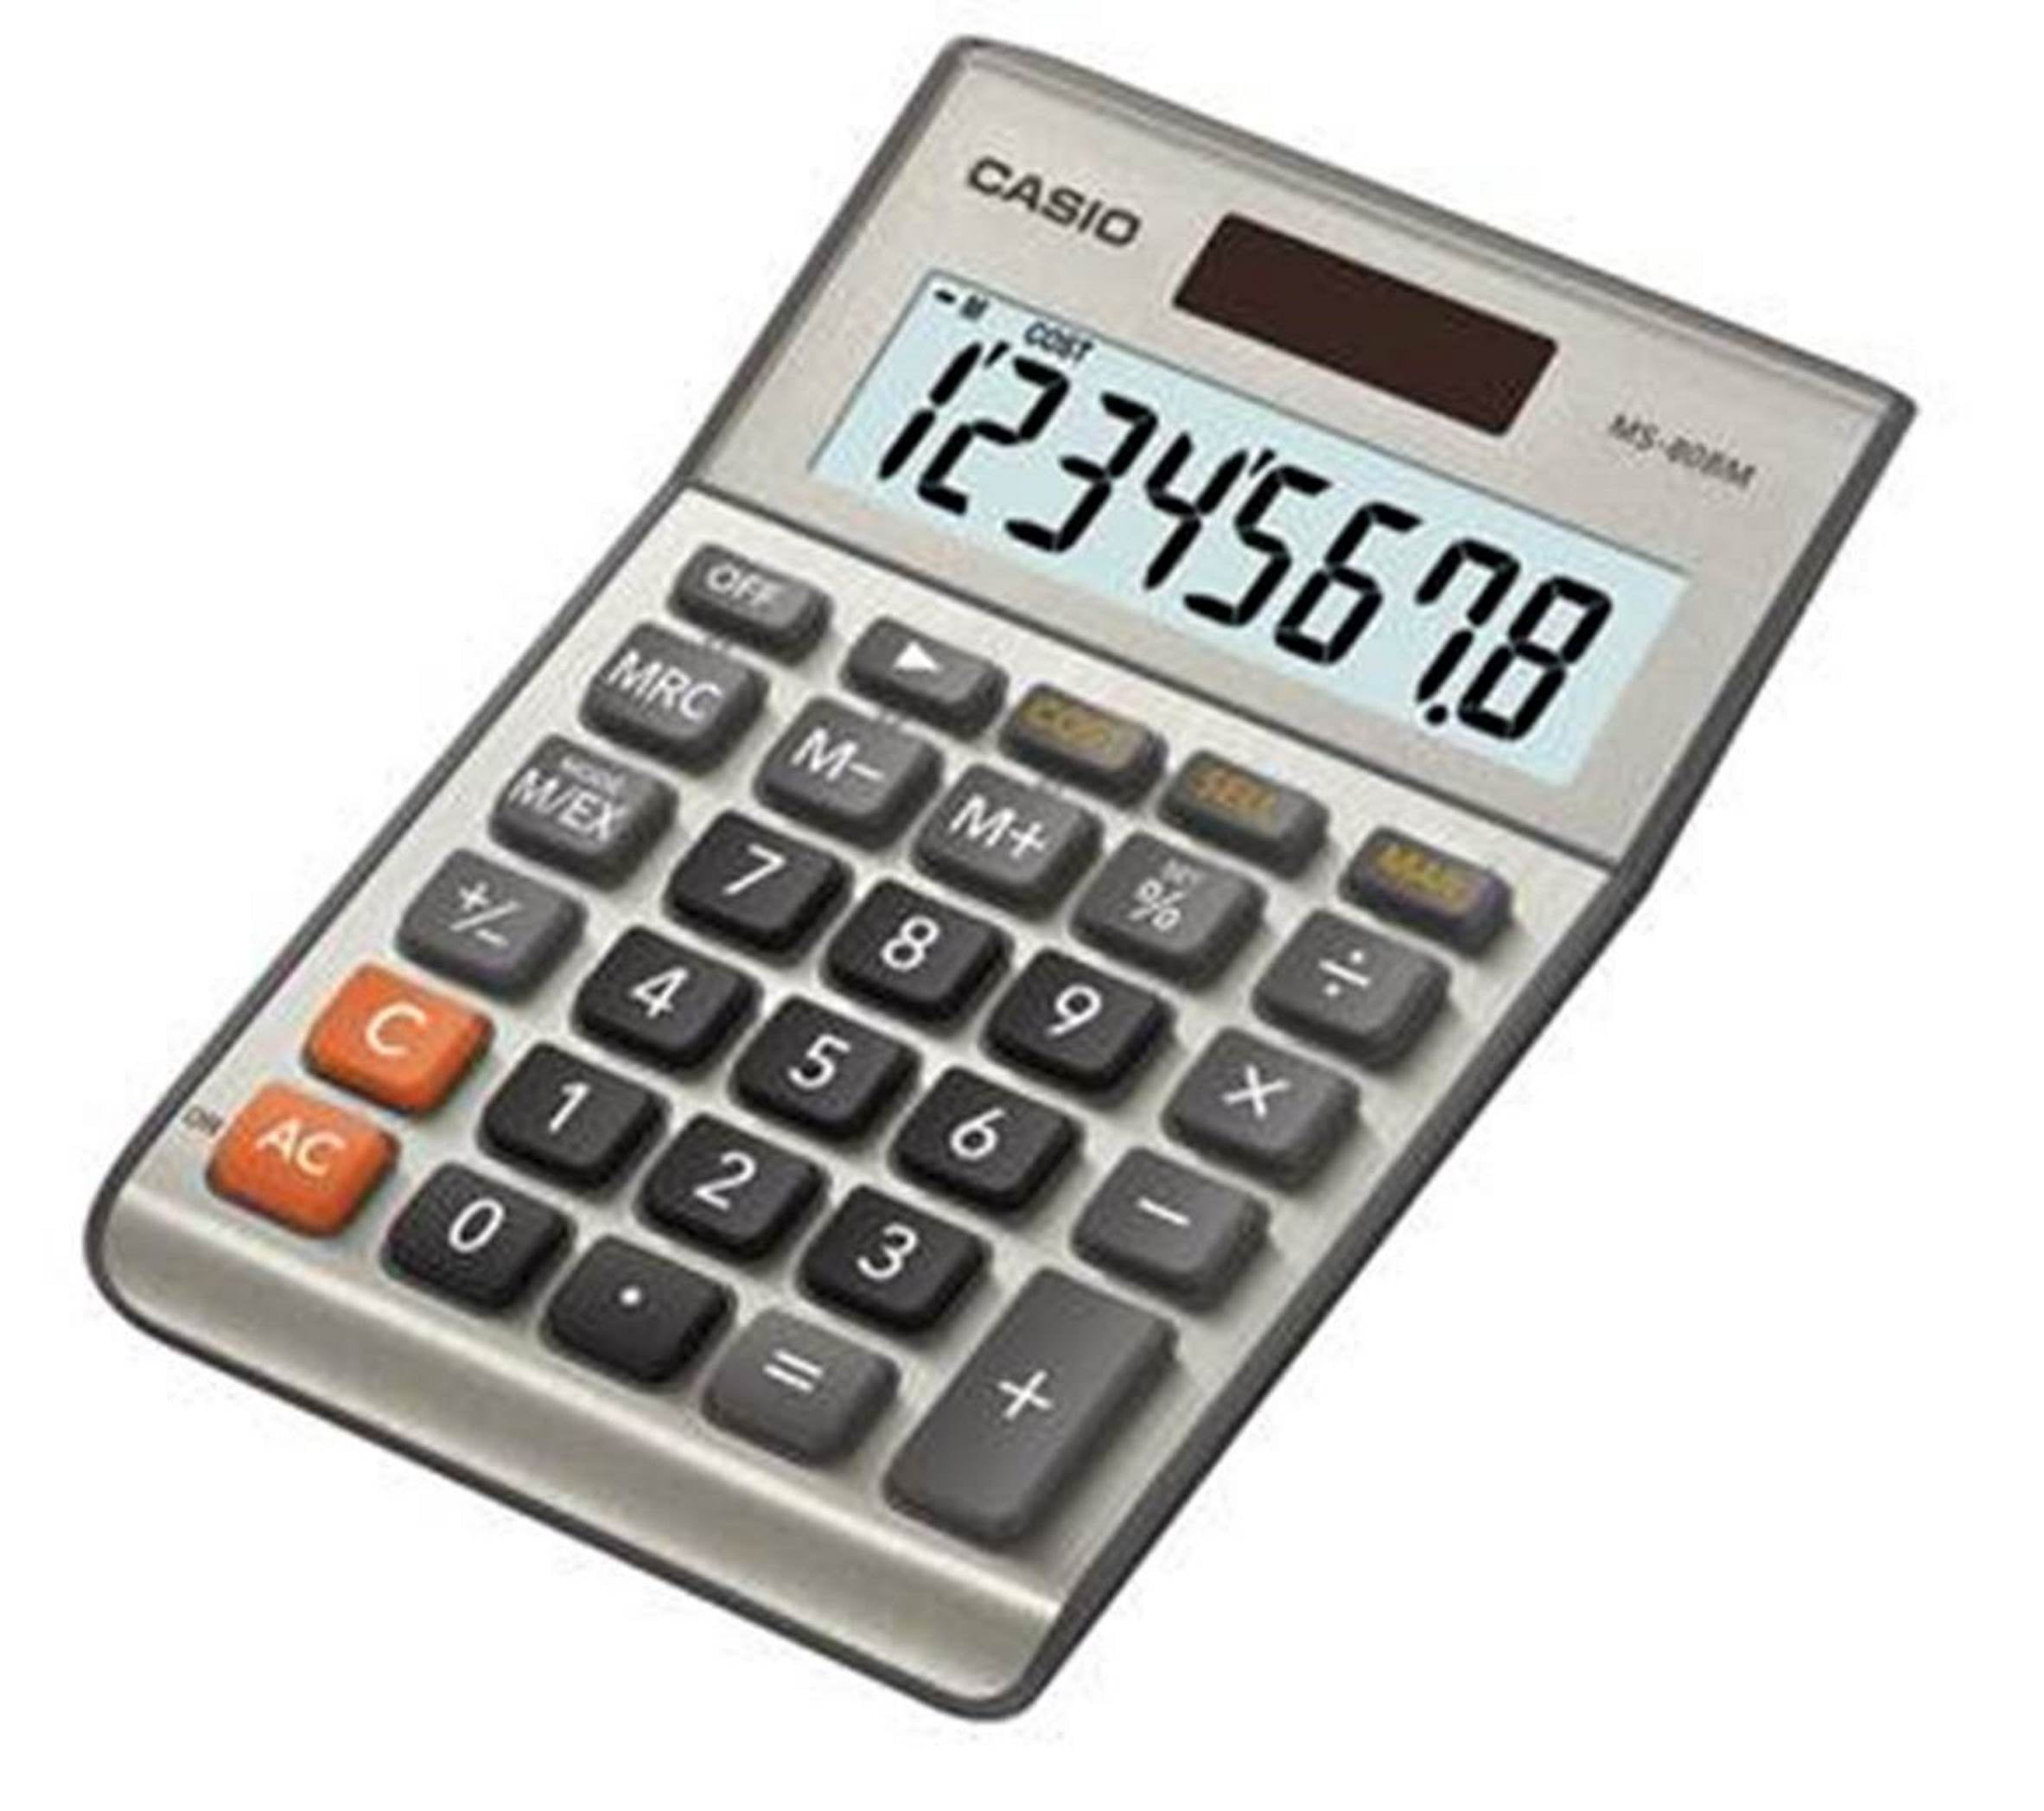 Details about   Casio LC-403TV Portable Calculator with Metal Faceplate Free Shipping 